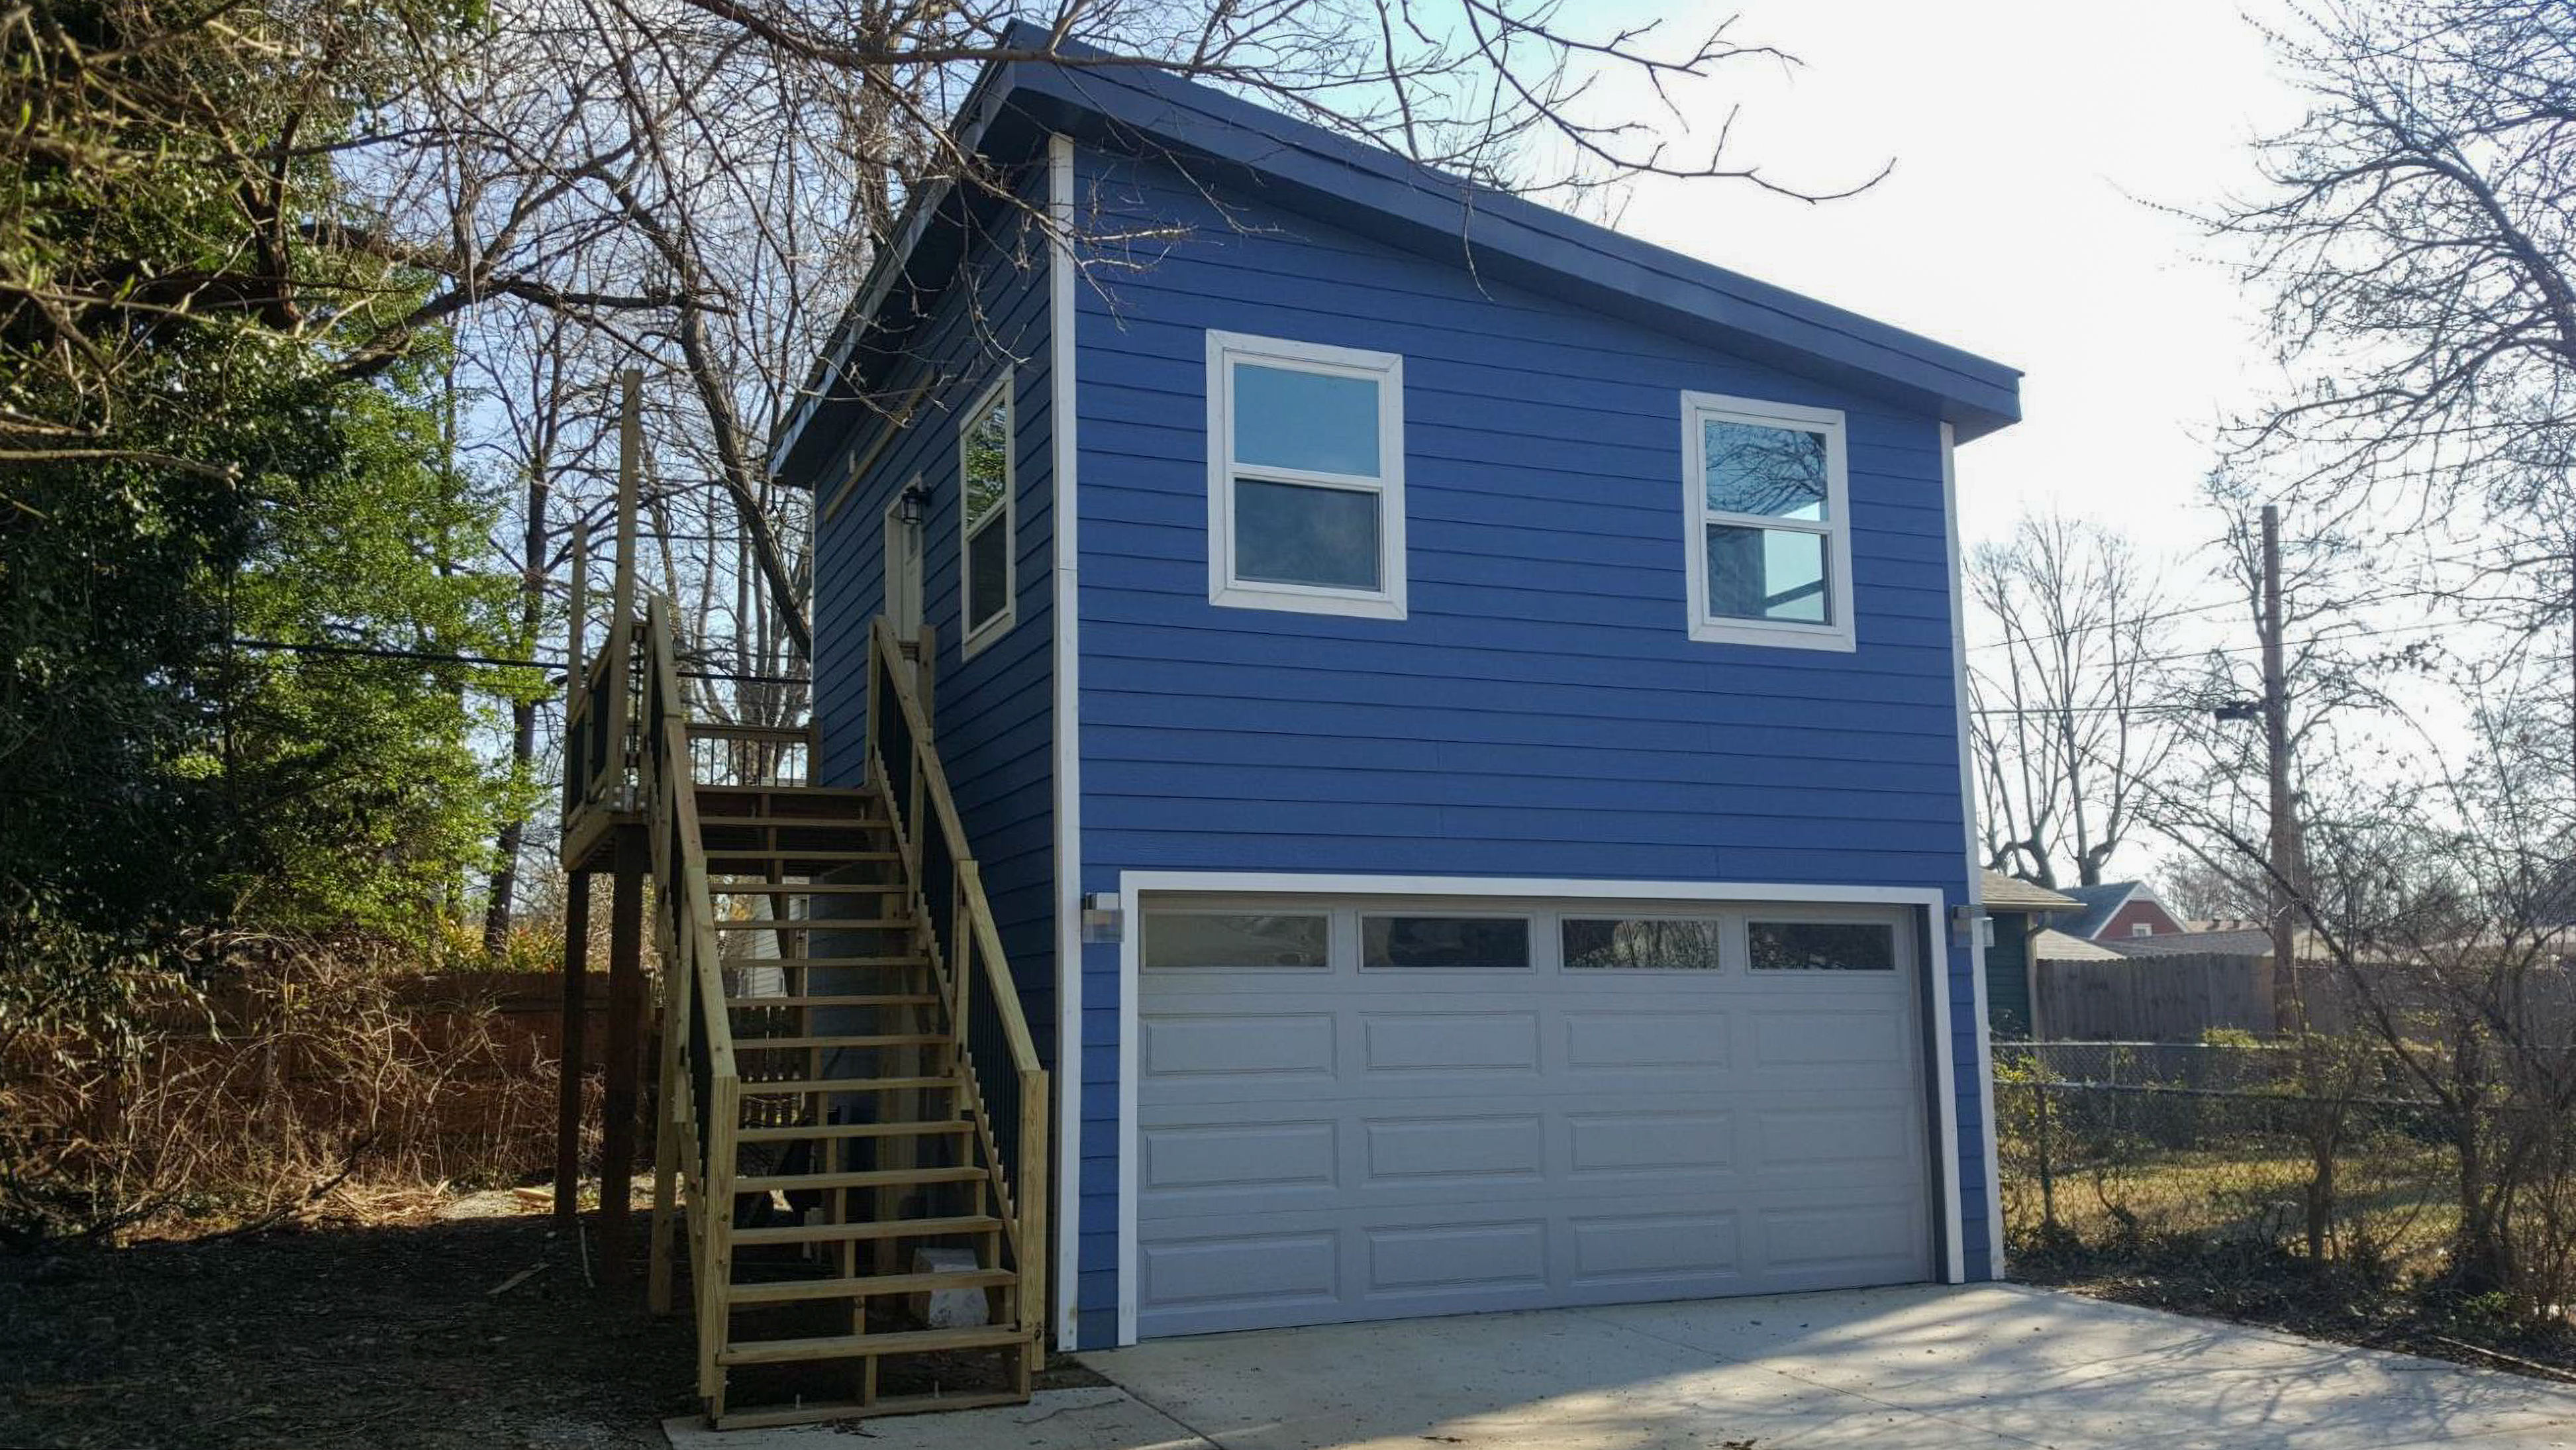 MSH 20180302 outdoors finished Blue Paneling Front Left Side View PX